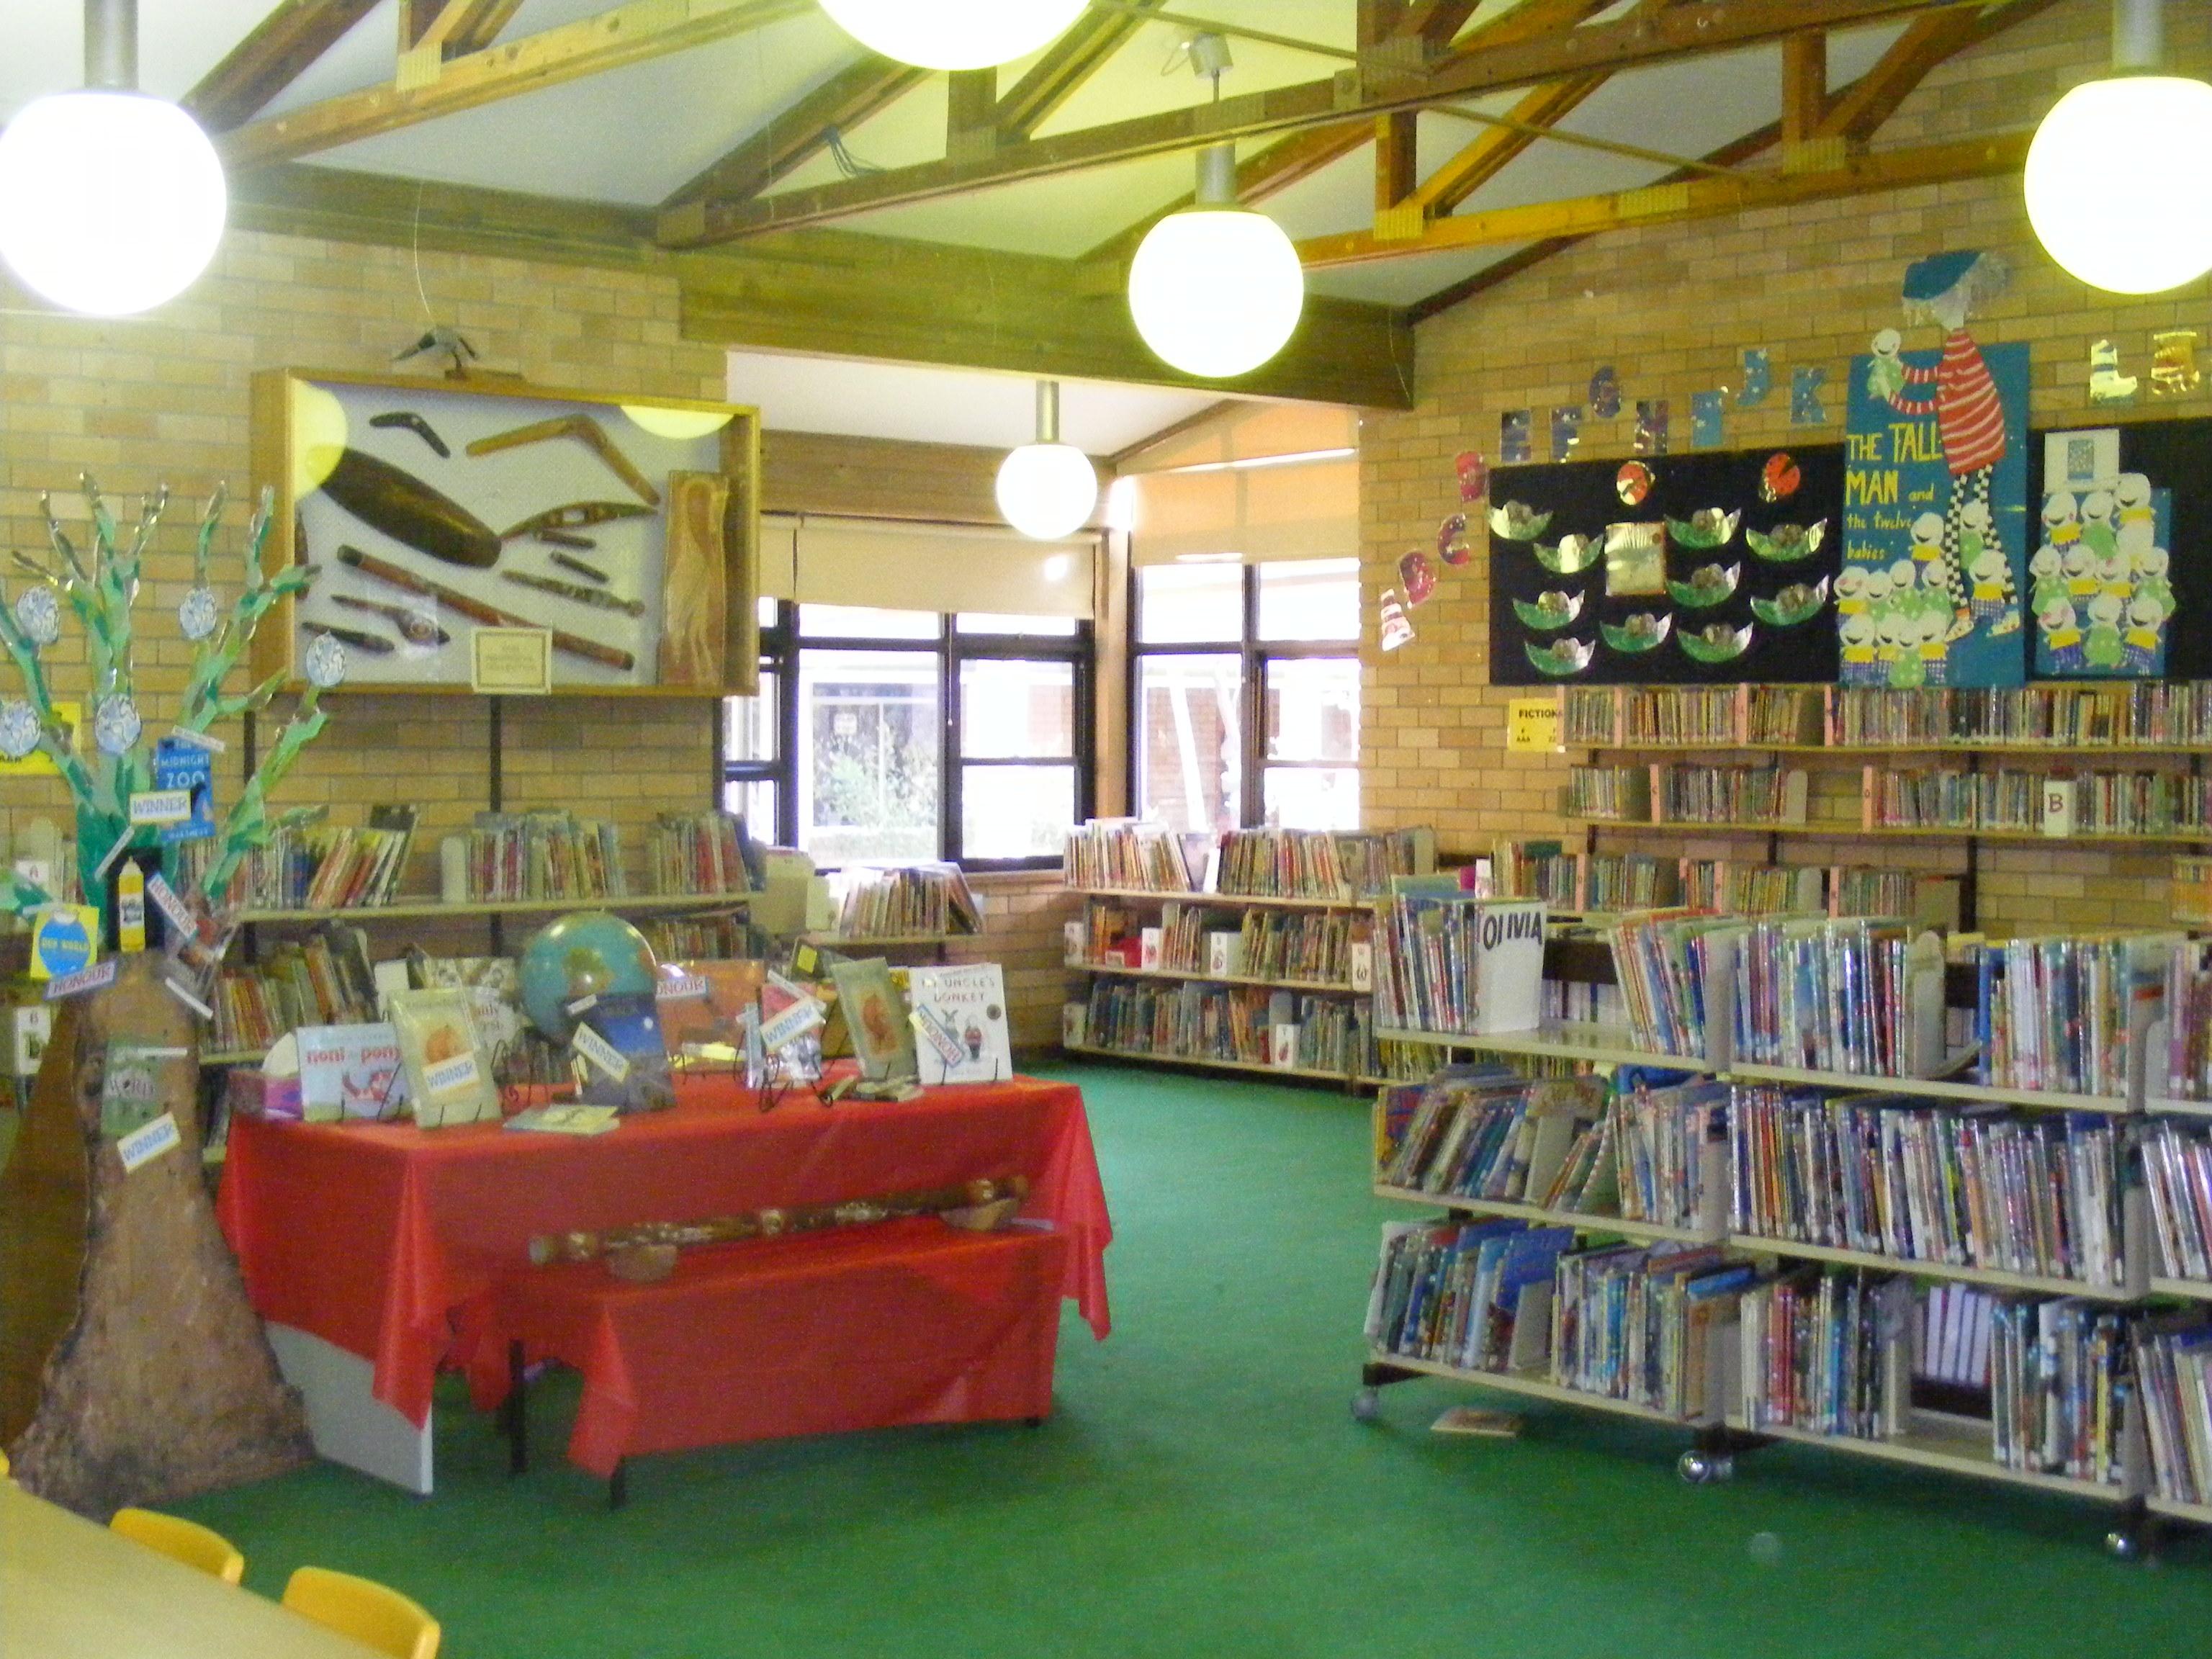 Our school library.